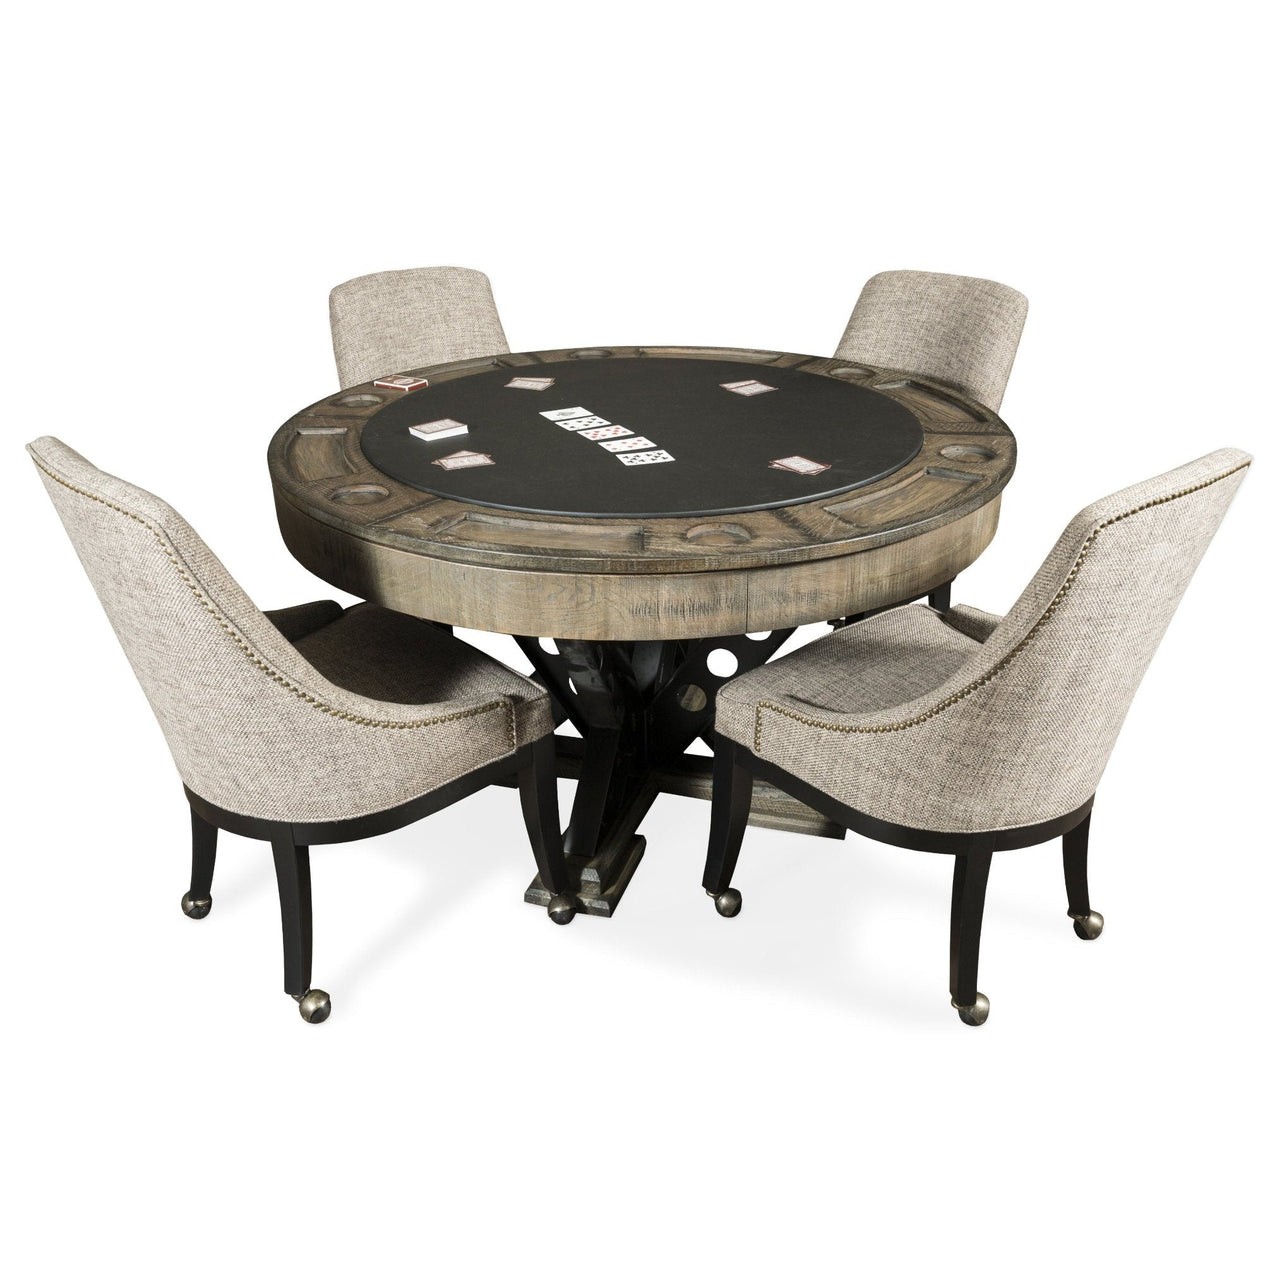 Presidential Billiards Convertible Poker & Dining Table Vienna-AMERICANA-POKER-TABLES